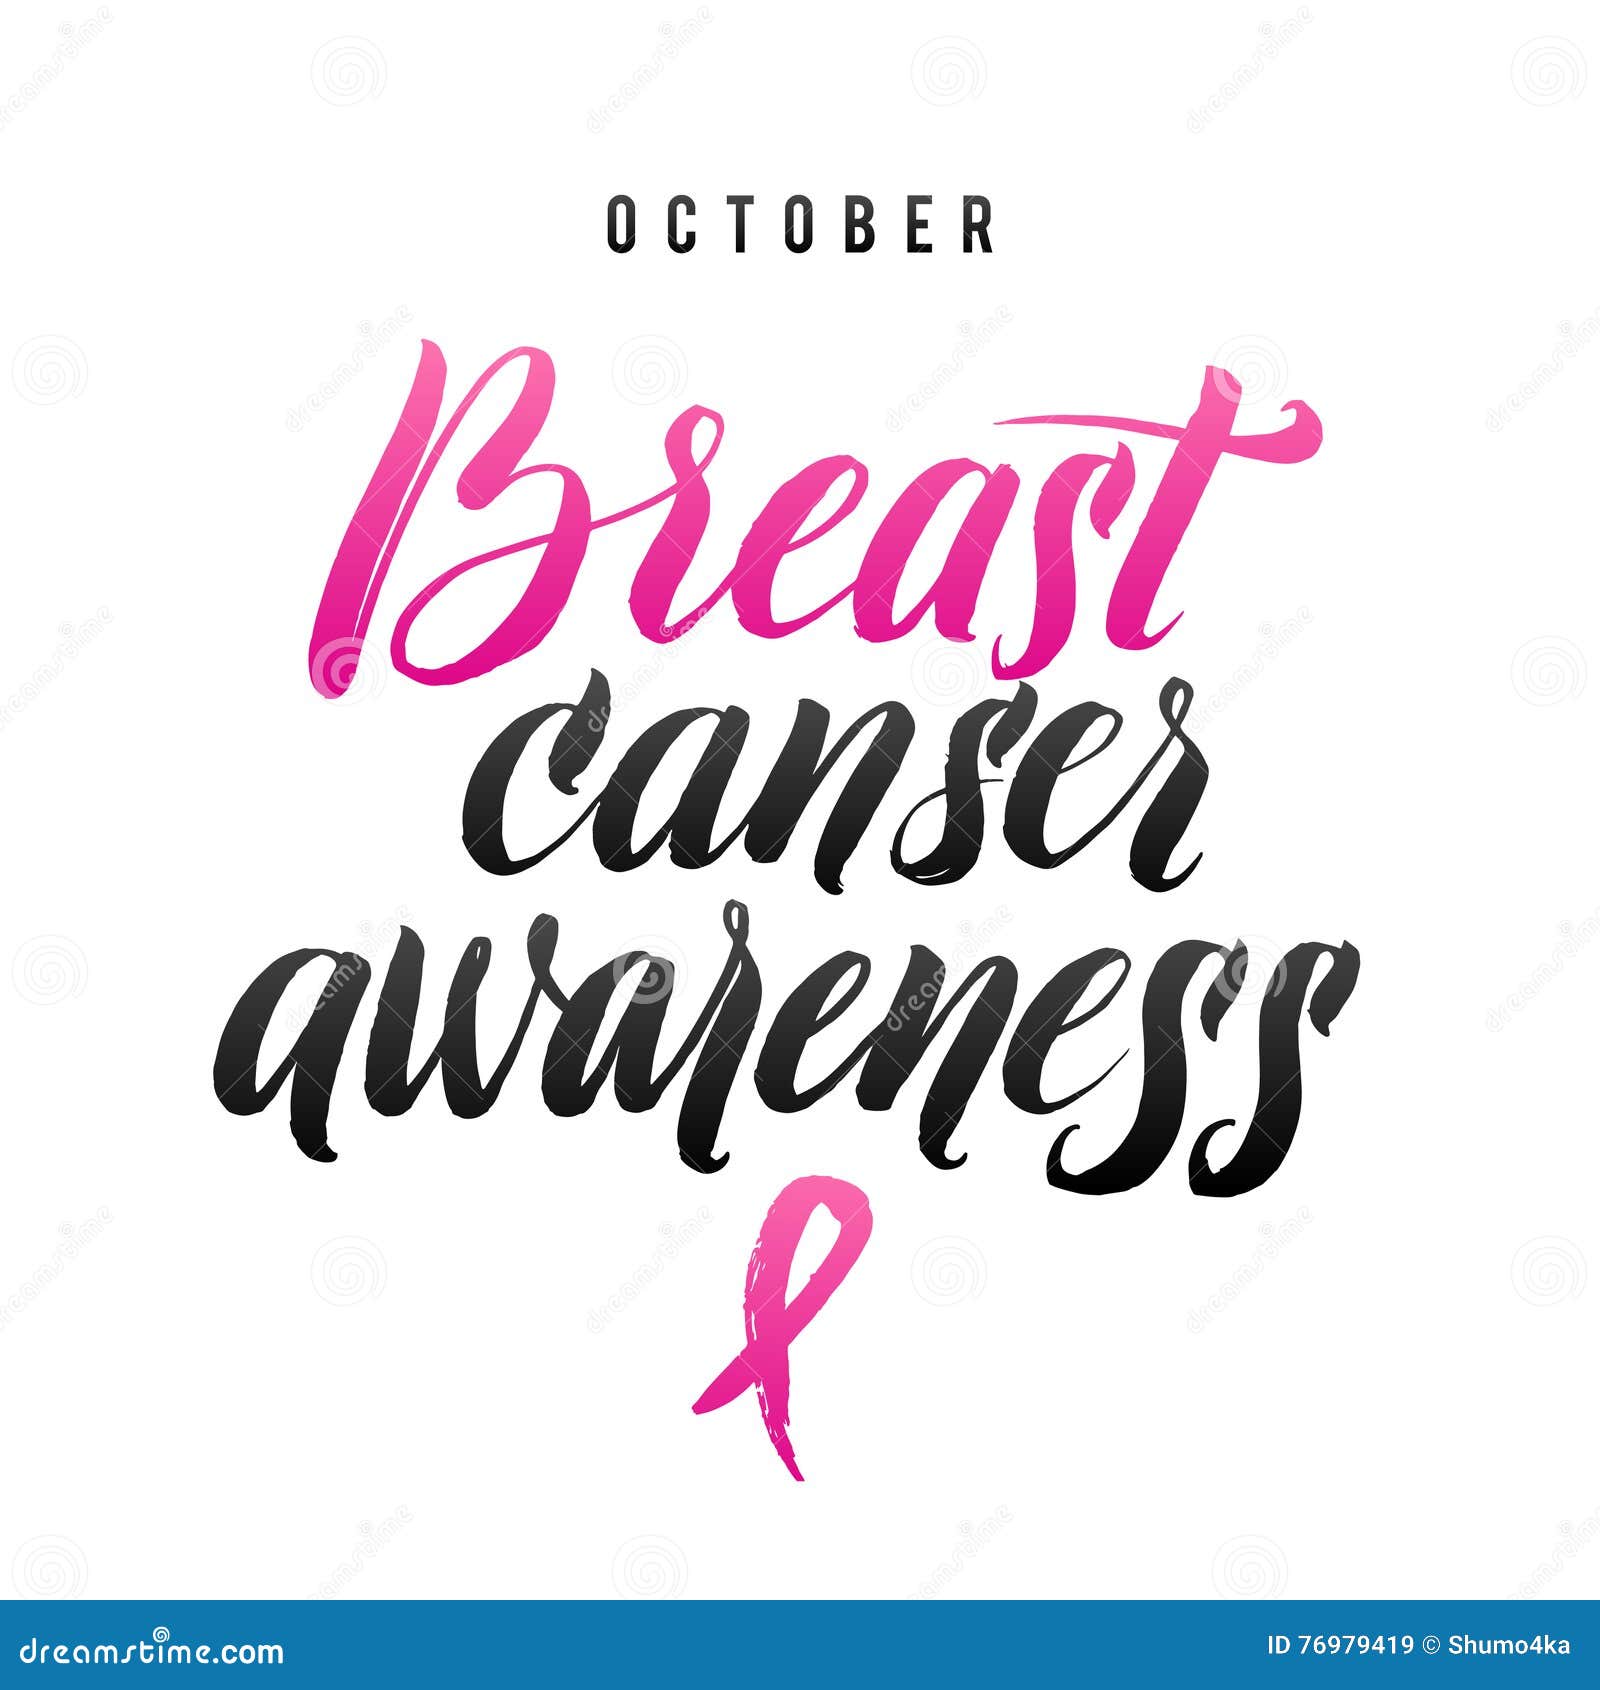 breast awareness fonts cancer